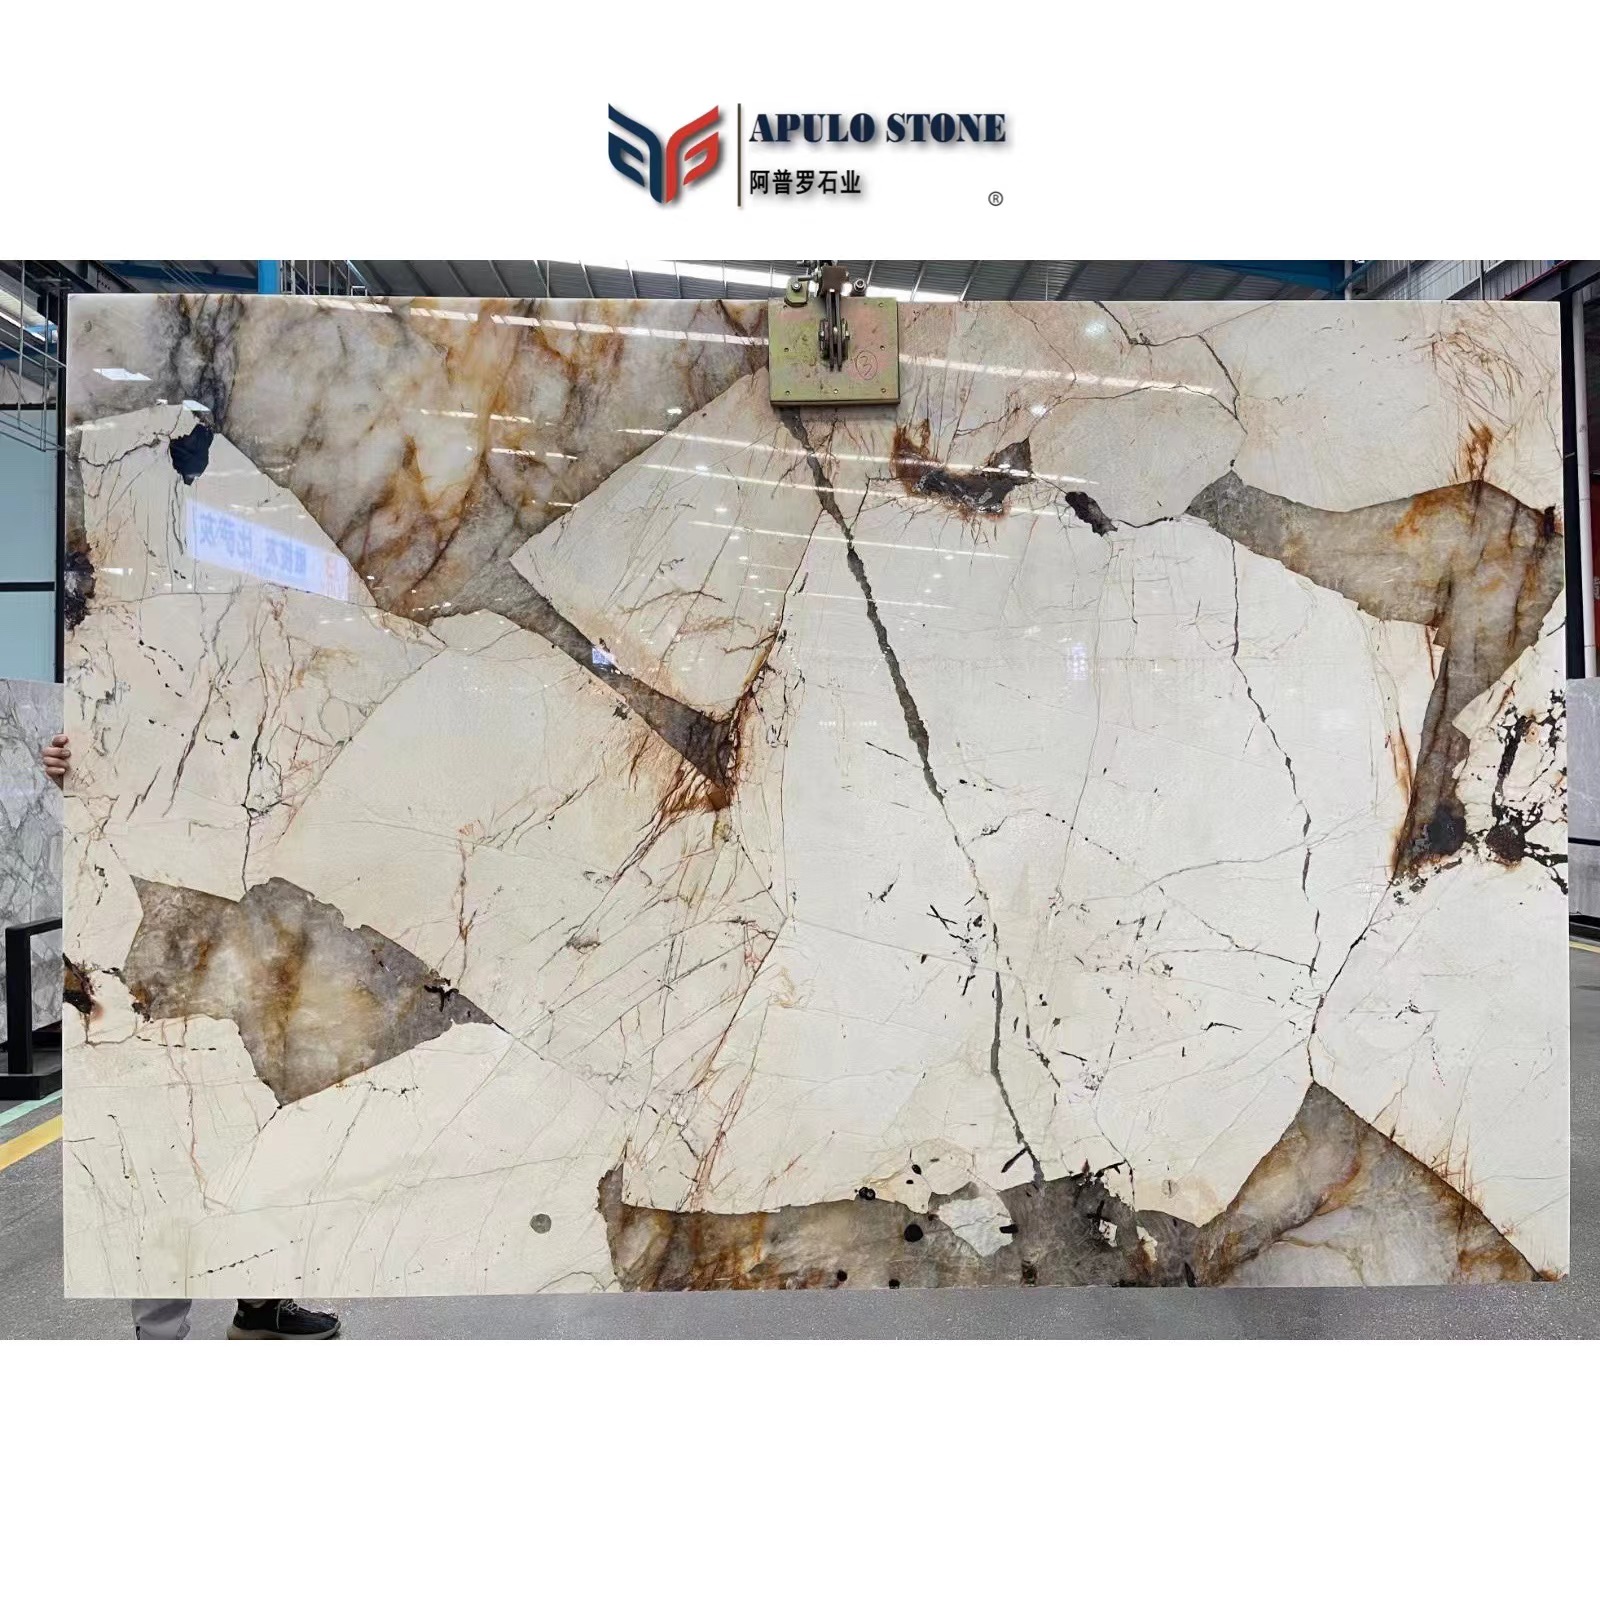 Natural Stone Slab Patagonia Granite Marble Apulo stone for Kitchen Top Background